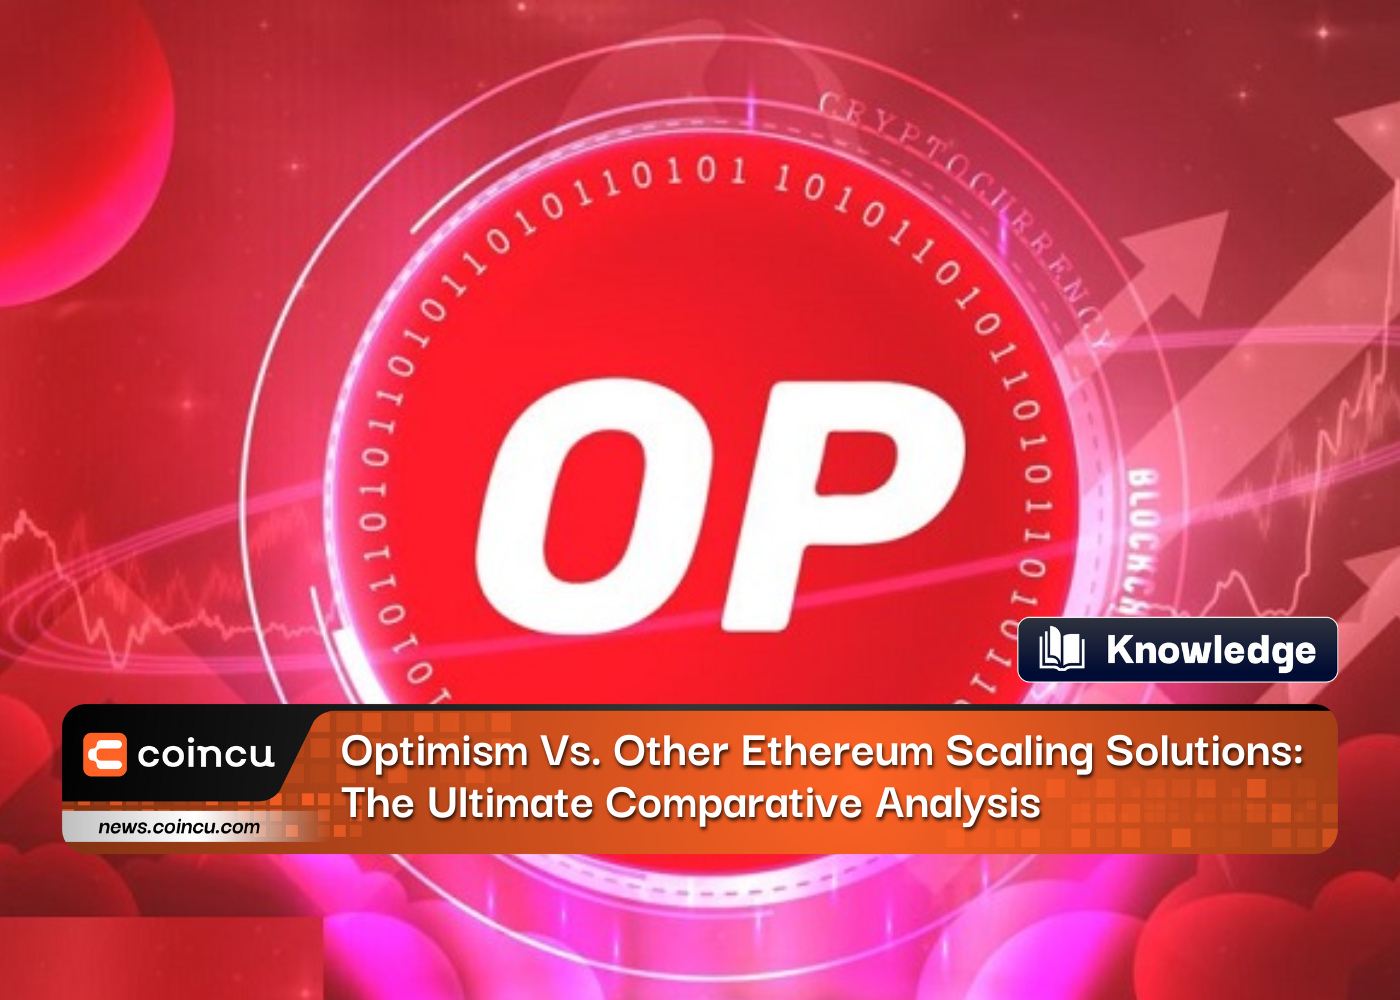 Optimism Vs. Other Ethereum Scaling Solutions: The Ultimate Comparative Analysis